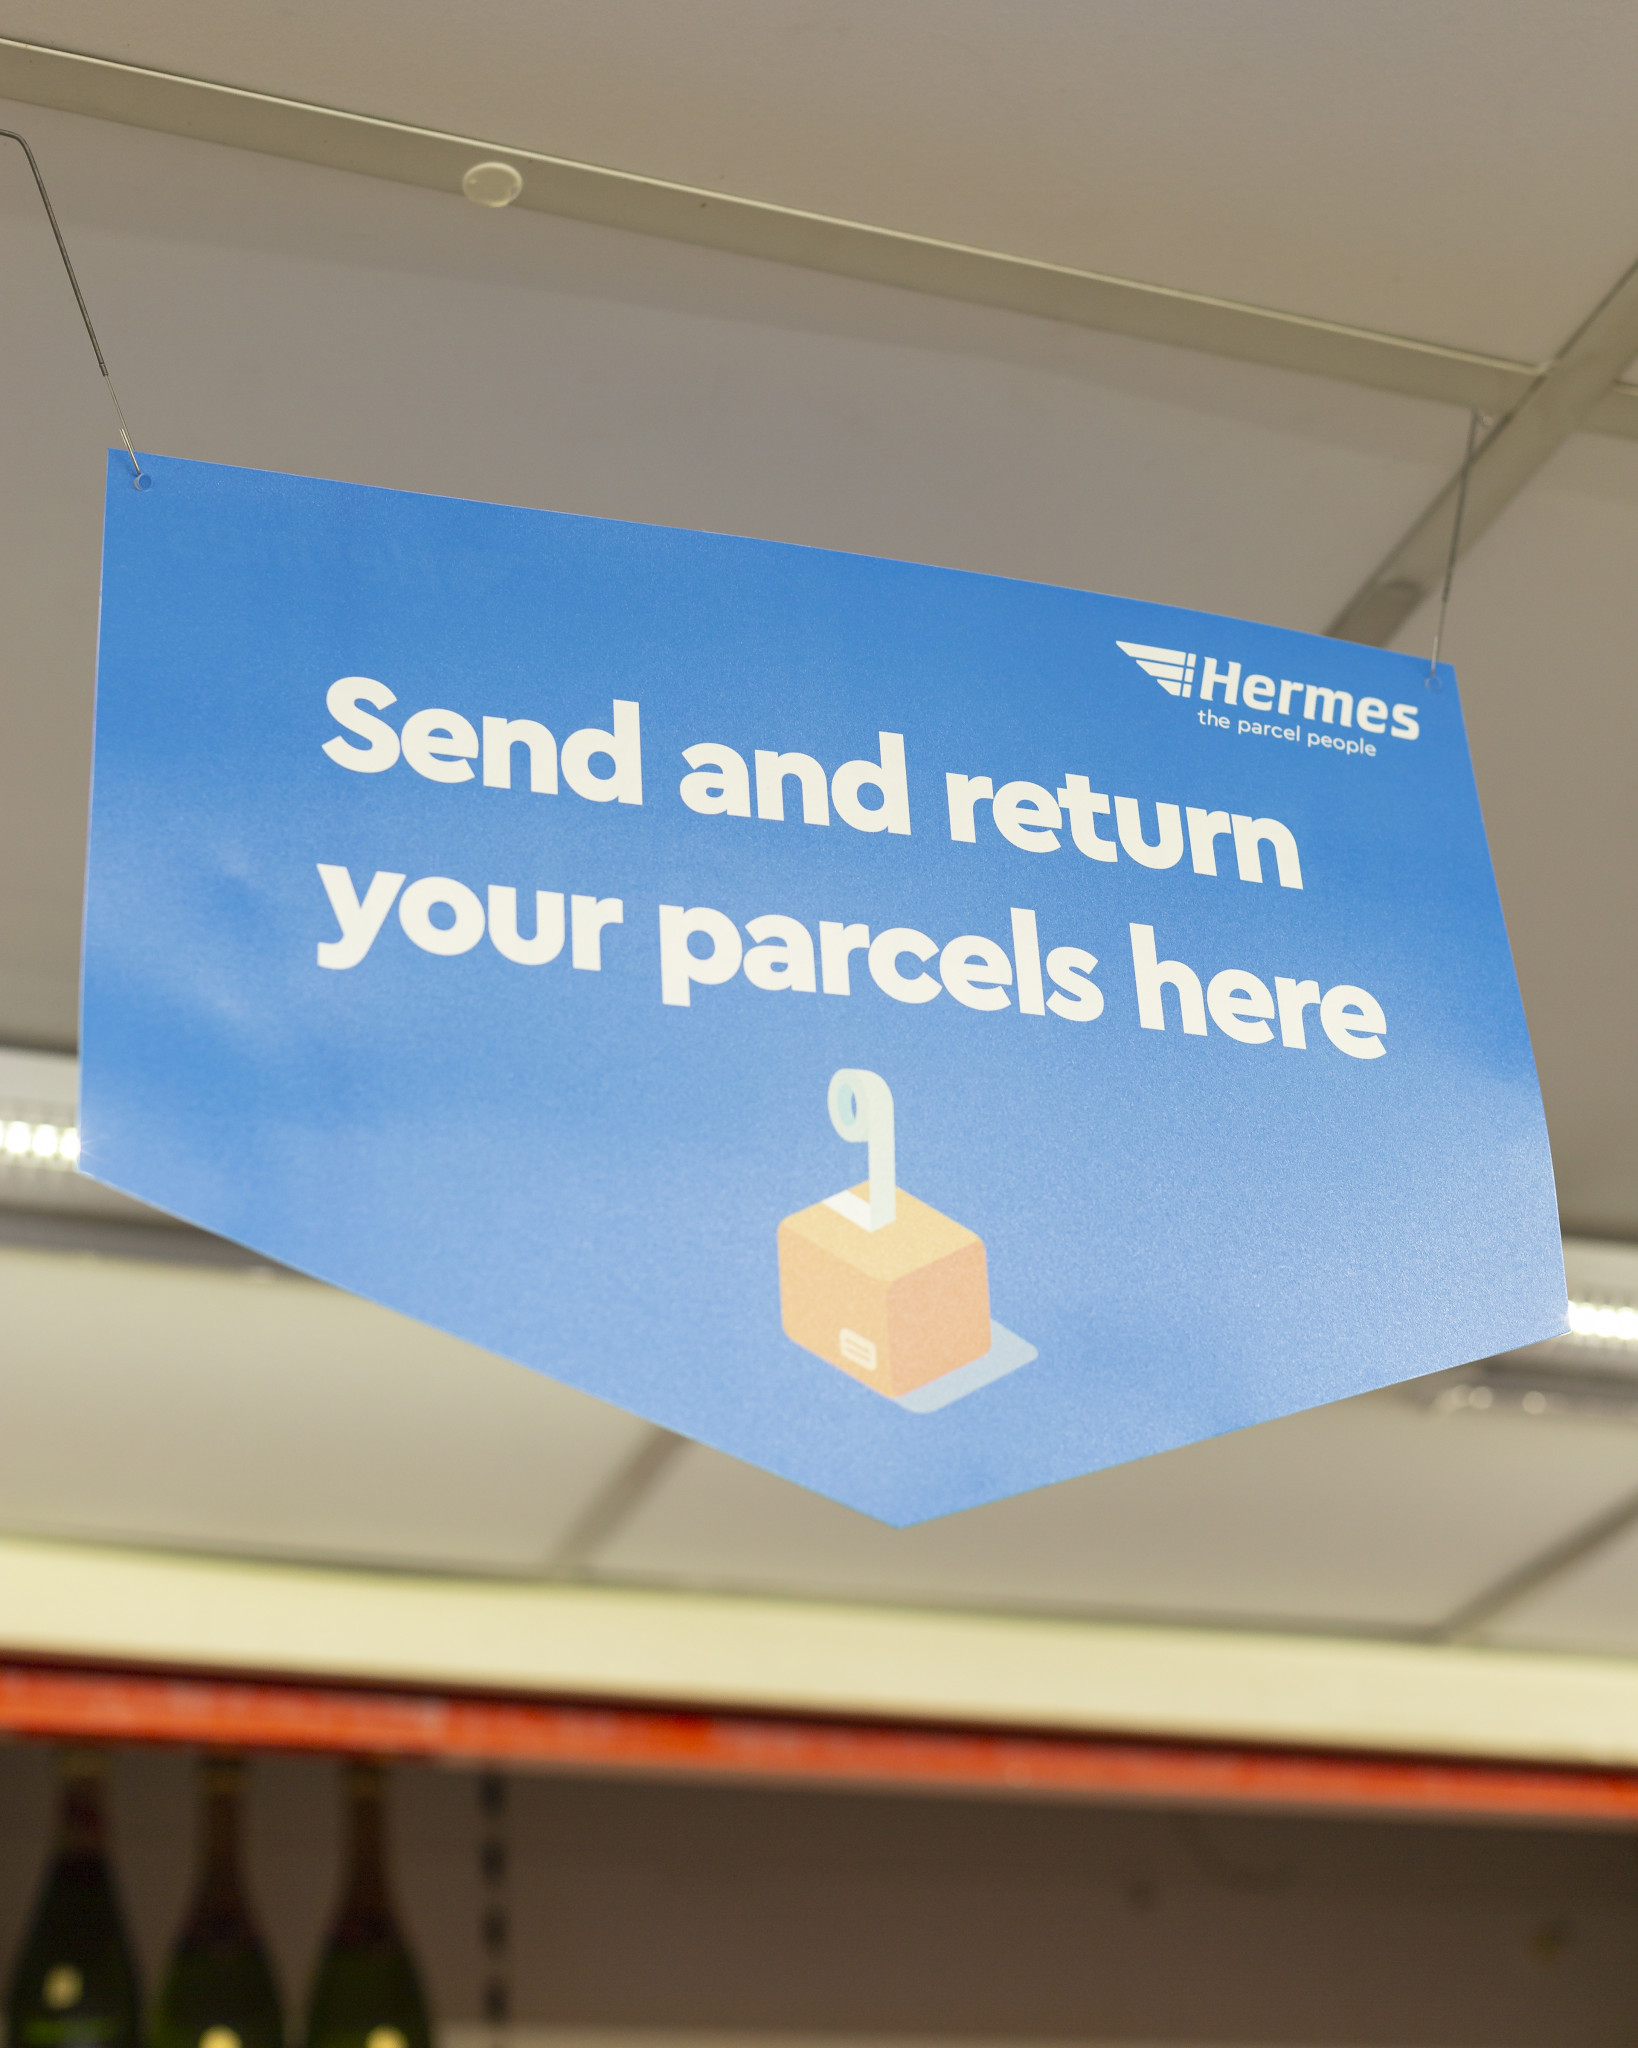 Hermes Partners with Tesco to Expand Its Parcelshop Network